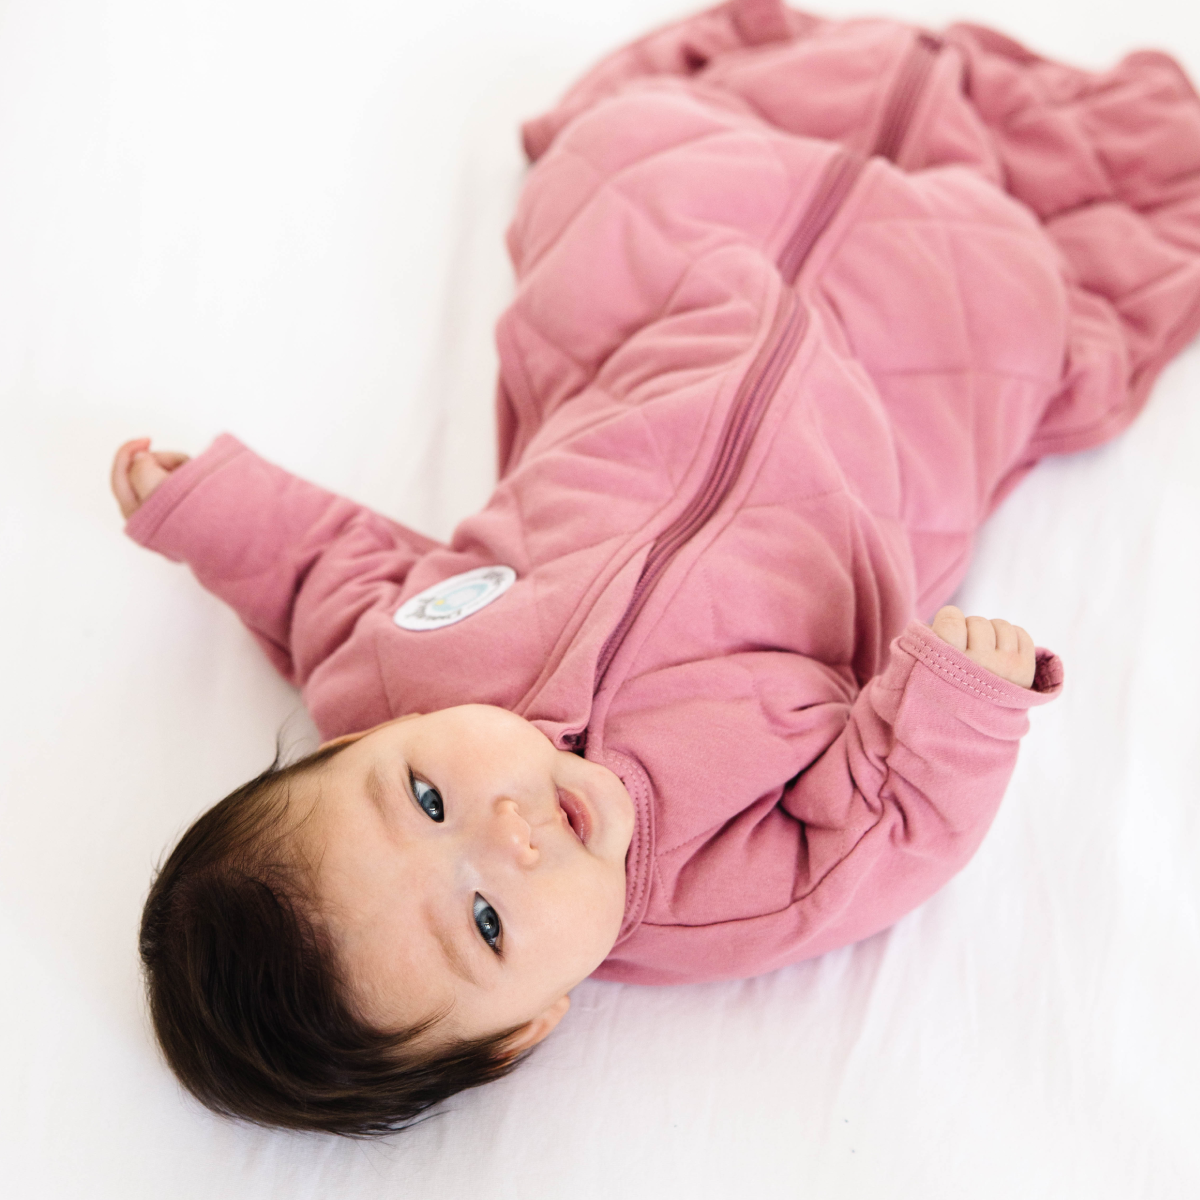 Dream Weighted Transition Swaddle